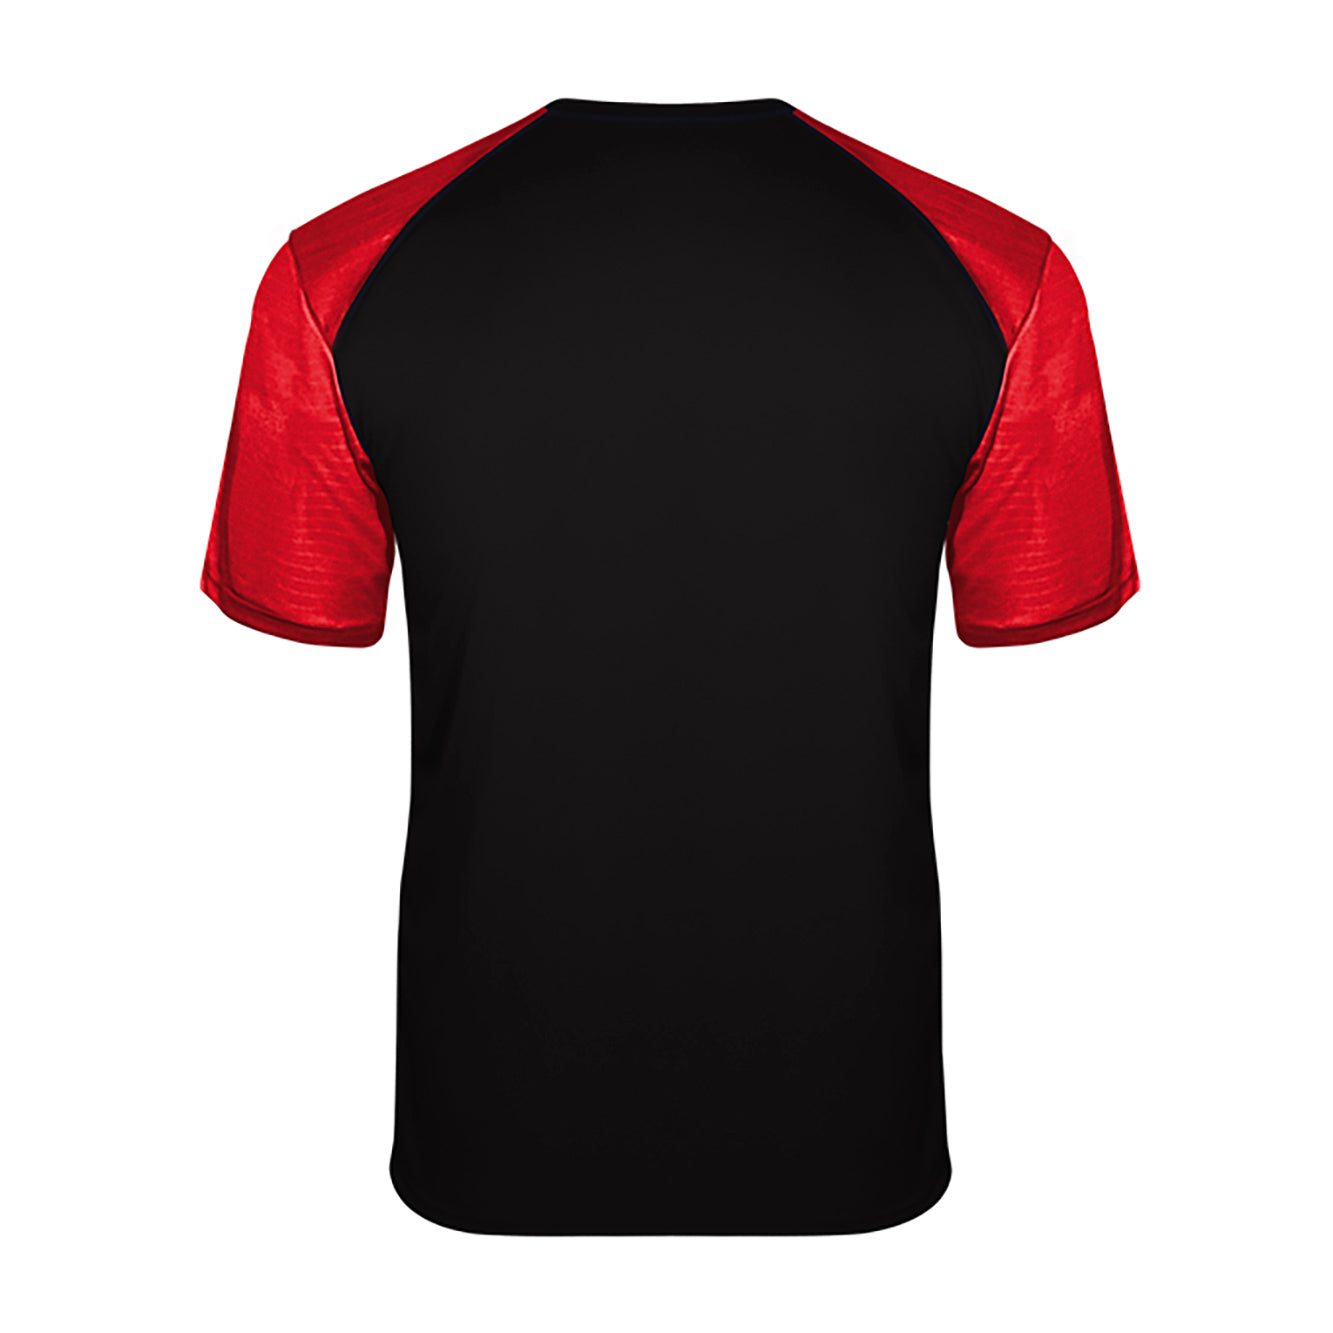 Breakout Performance Jersey - Adult